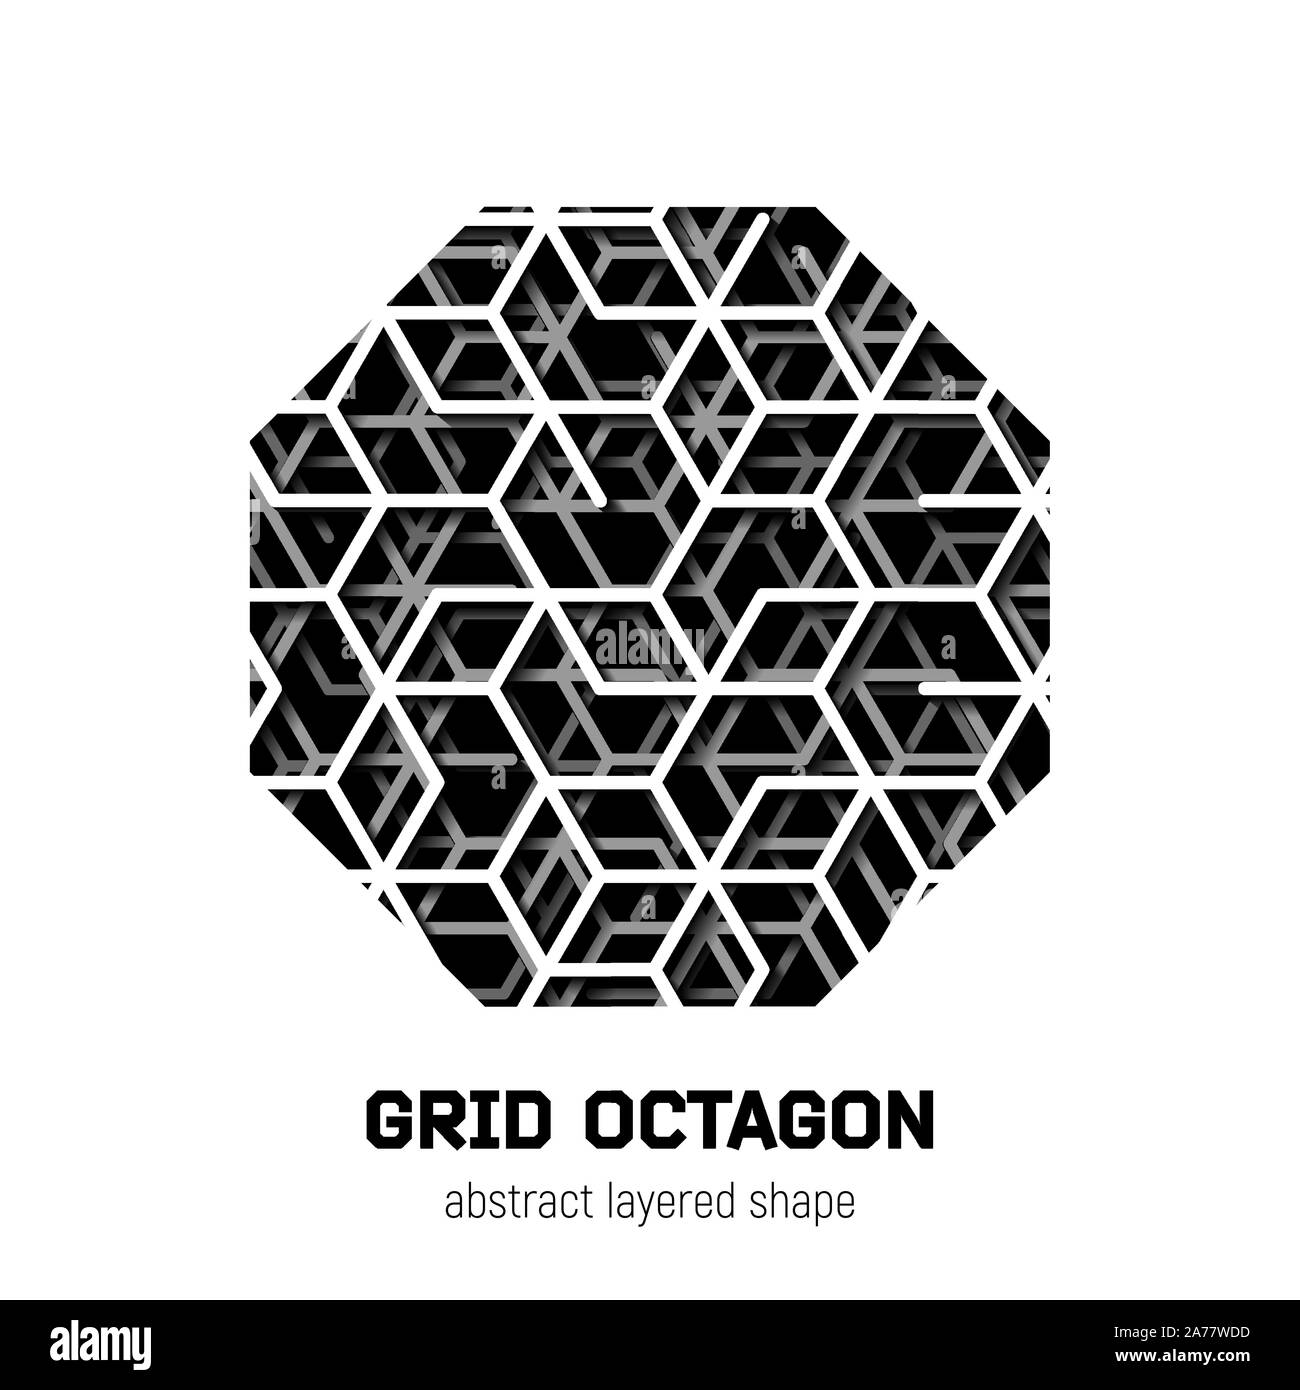 Abstract octagon shape with layered lines triangular grid and shadow Stock Vector